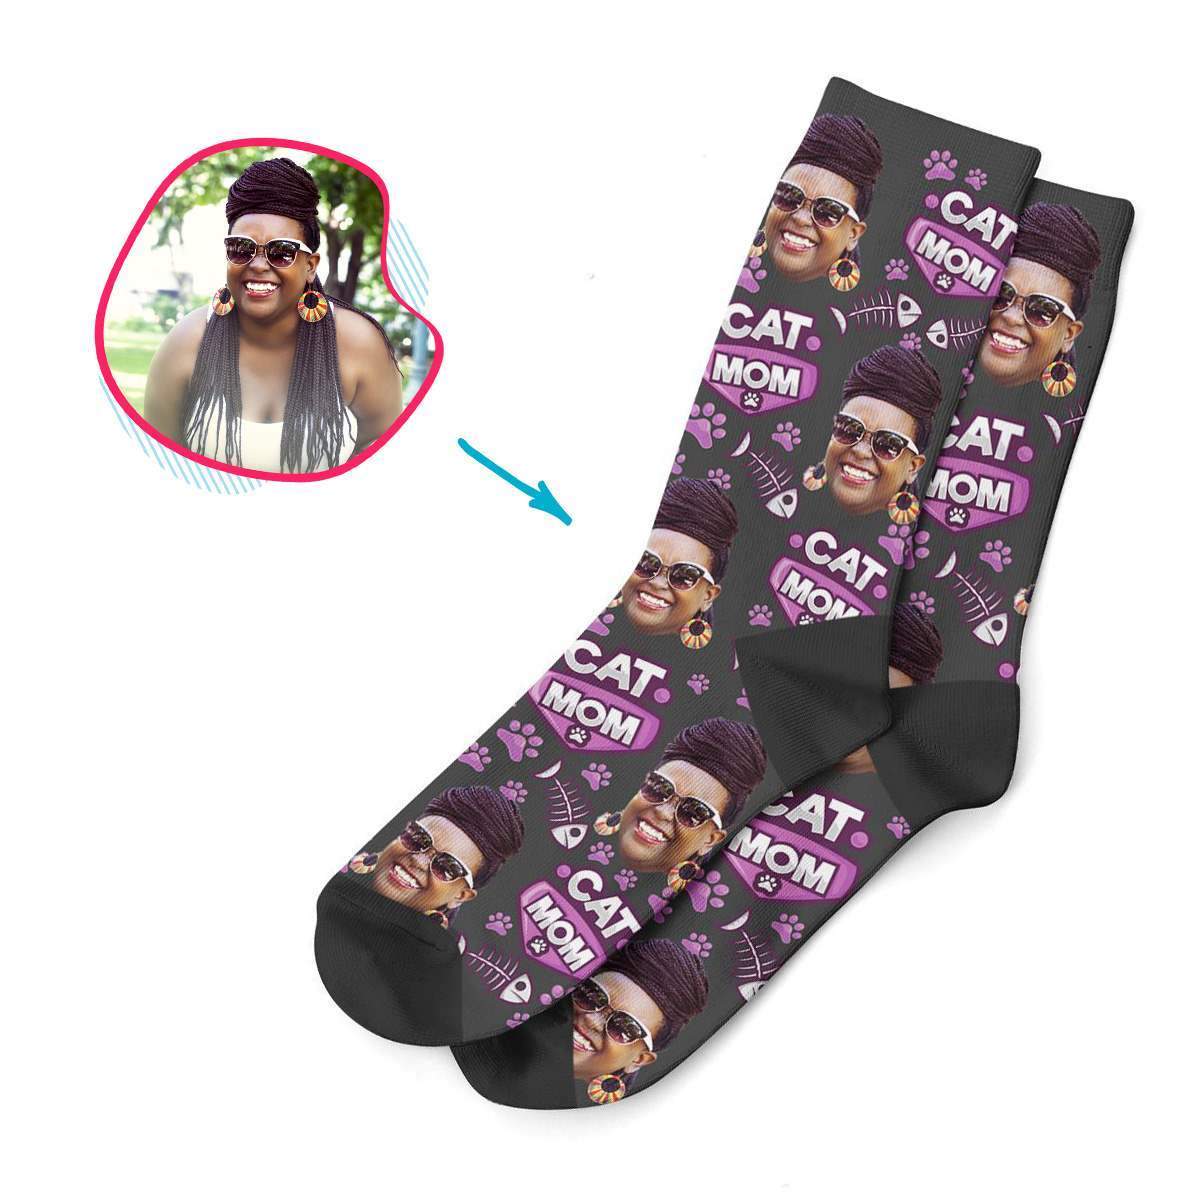 dark Cat Mom socks personalized with photo of face printed on them